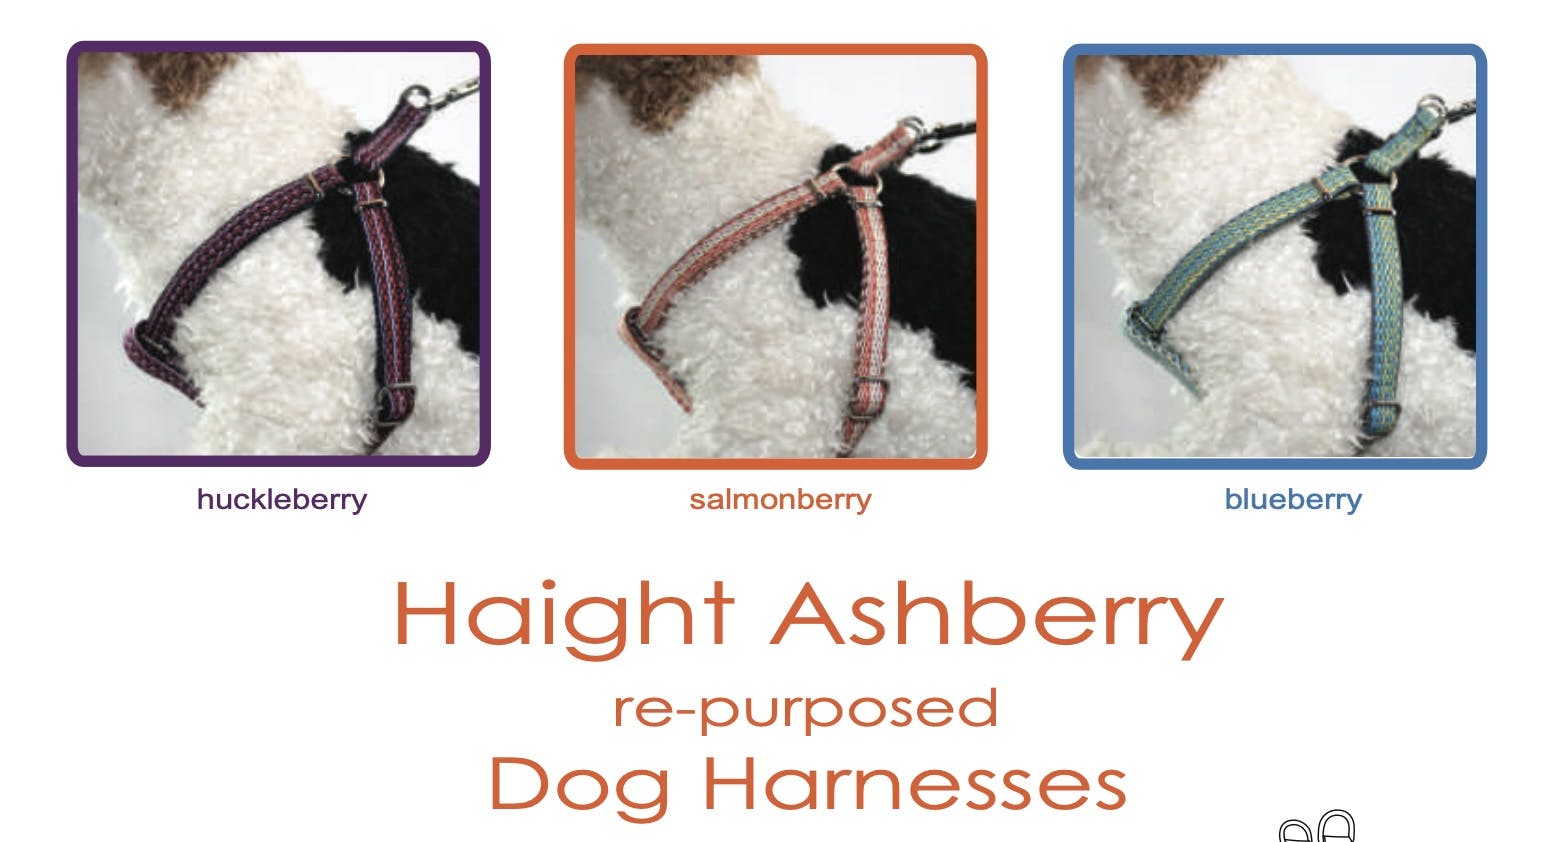 Dog Harness - Haight Ashberry Repurposed